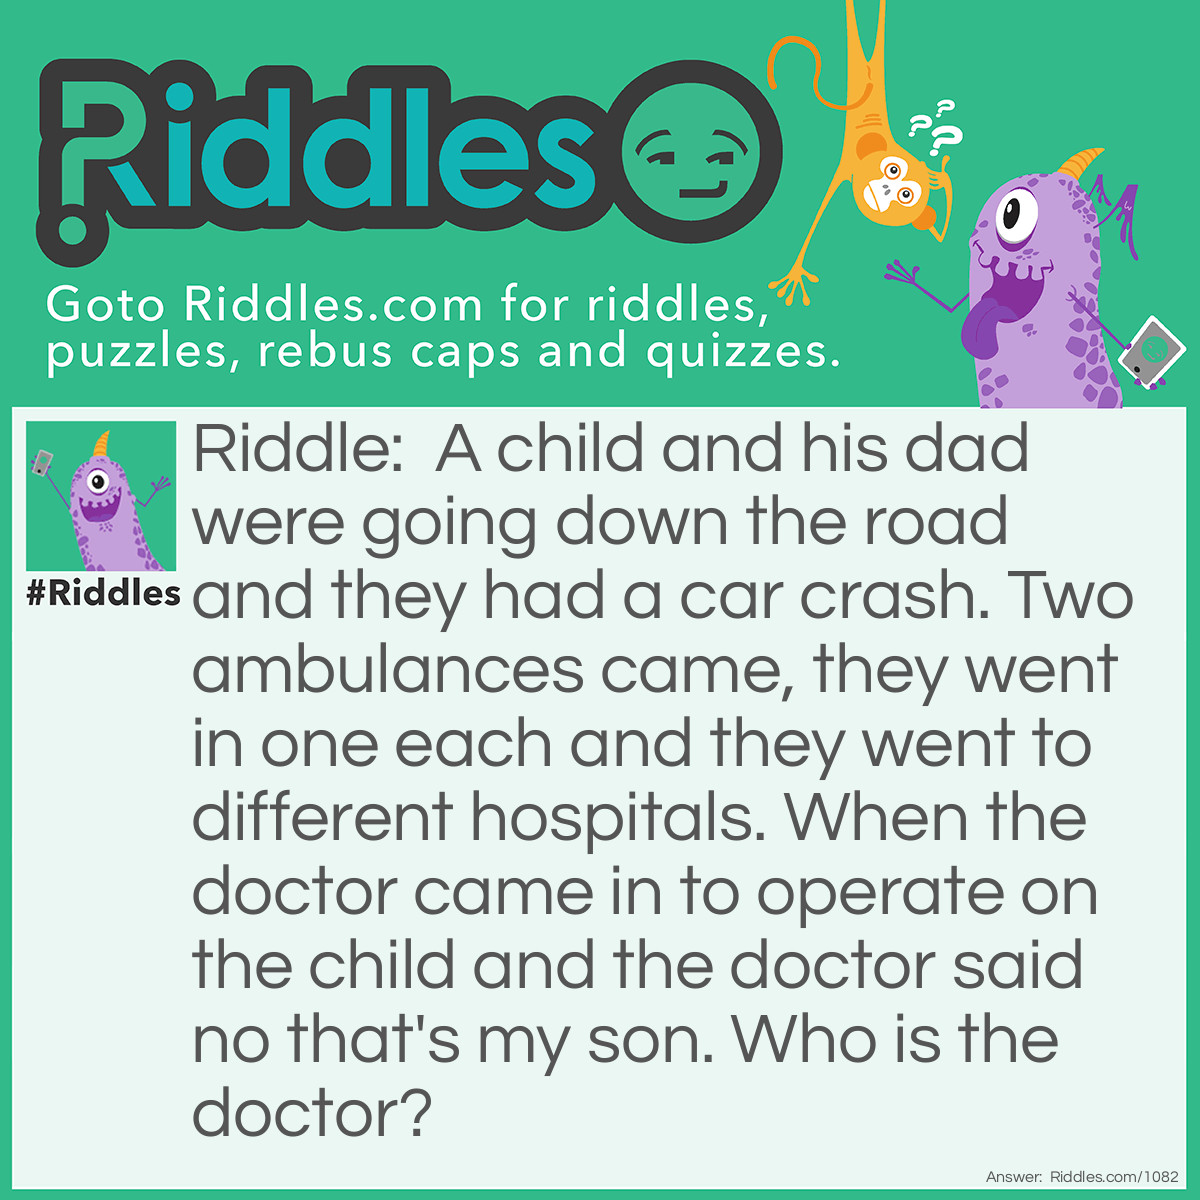 Riddle: A child and his dad were going down the road and they had a car crash. Two ambulances came, they went in one each and they went to different hospitals. When the doctor came in to operate on the child and the doctor said no that's my son. Who is the doctor? Answer: The doctor was his mother.